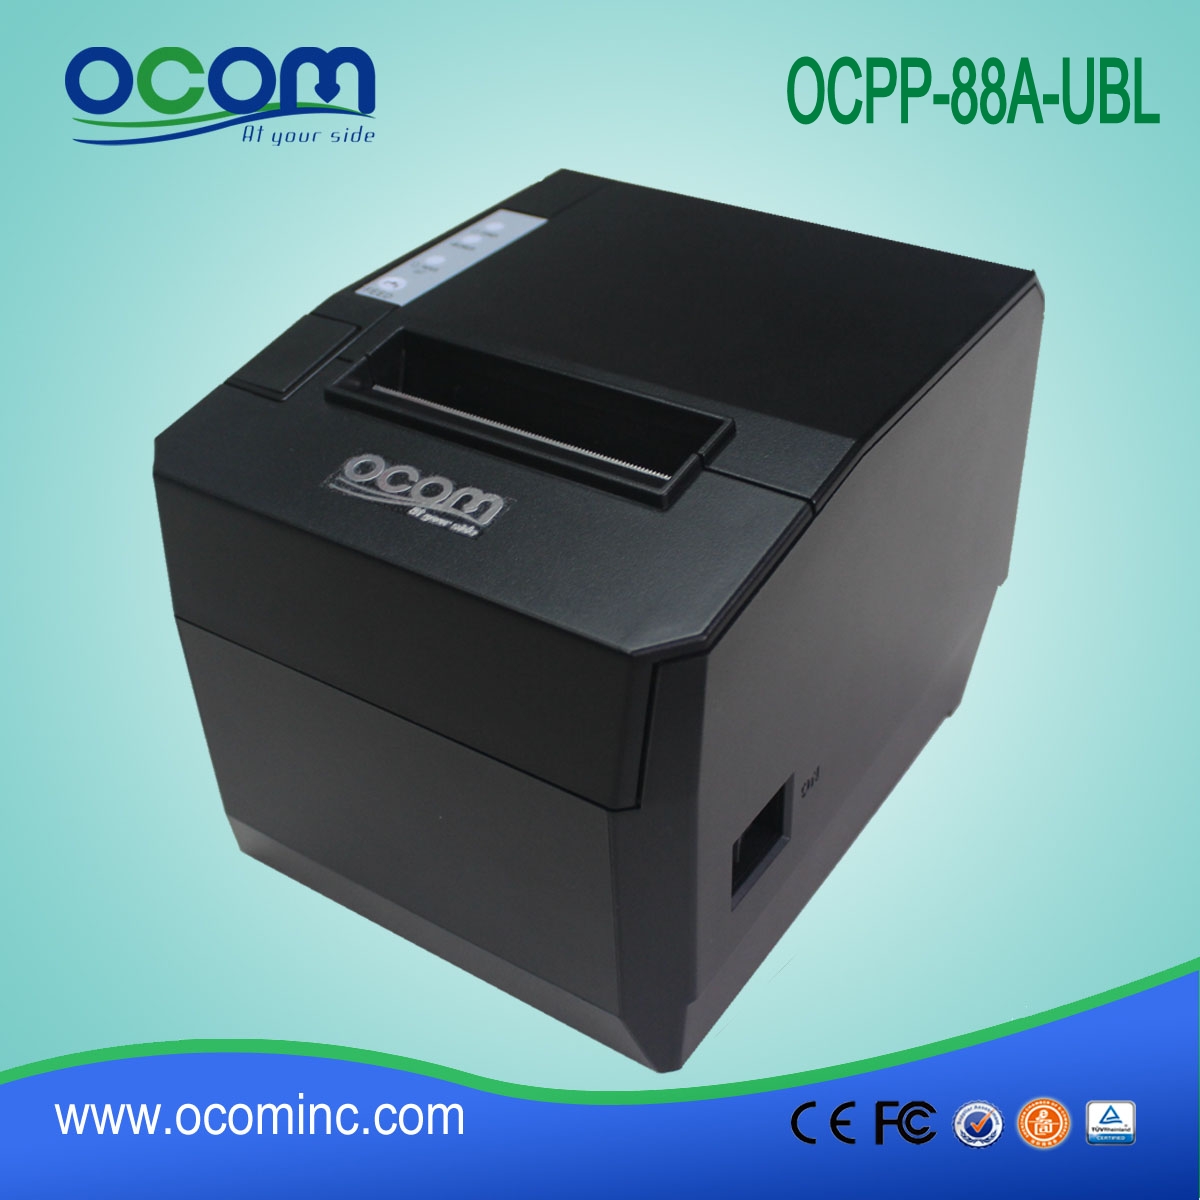 OCPP-88A Easily Setting Up Restaurant 80mm Thermal Receipt Printer with Self cut